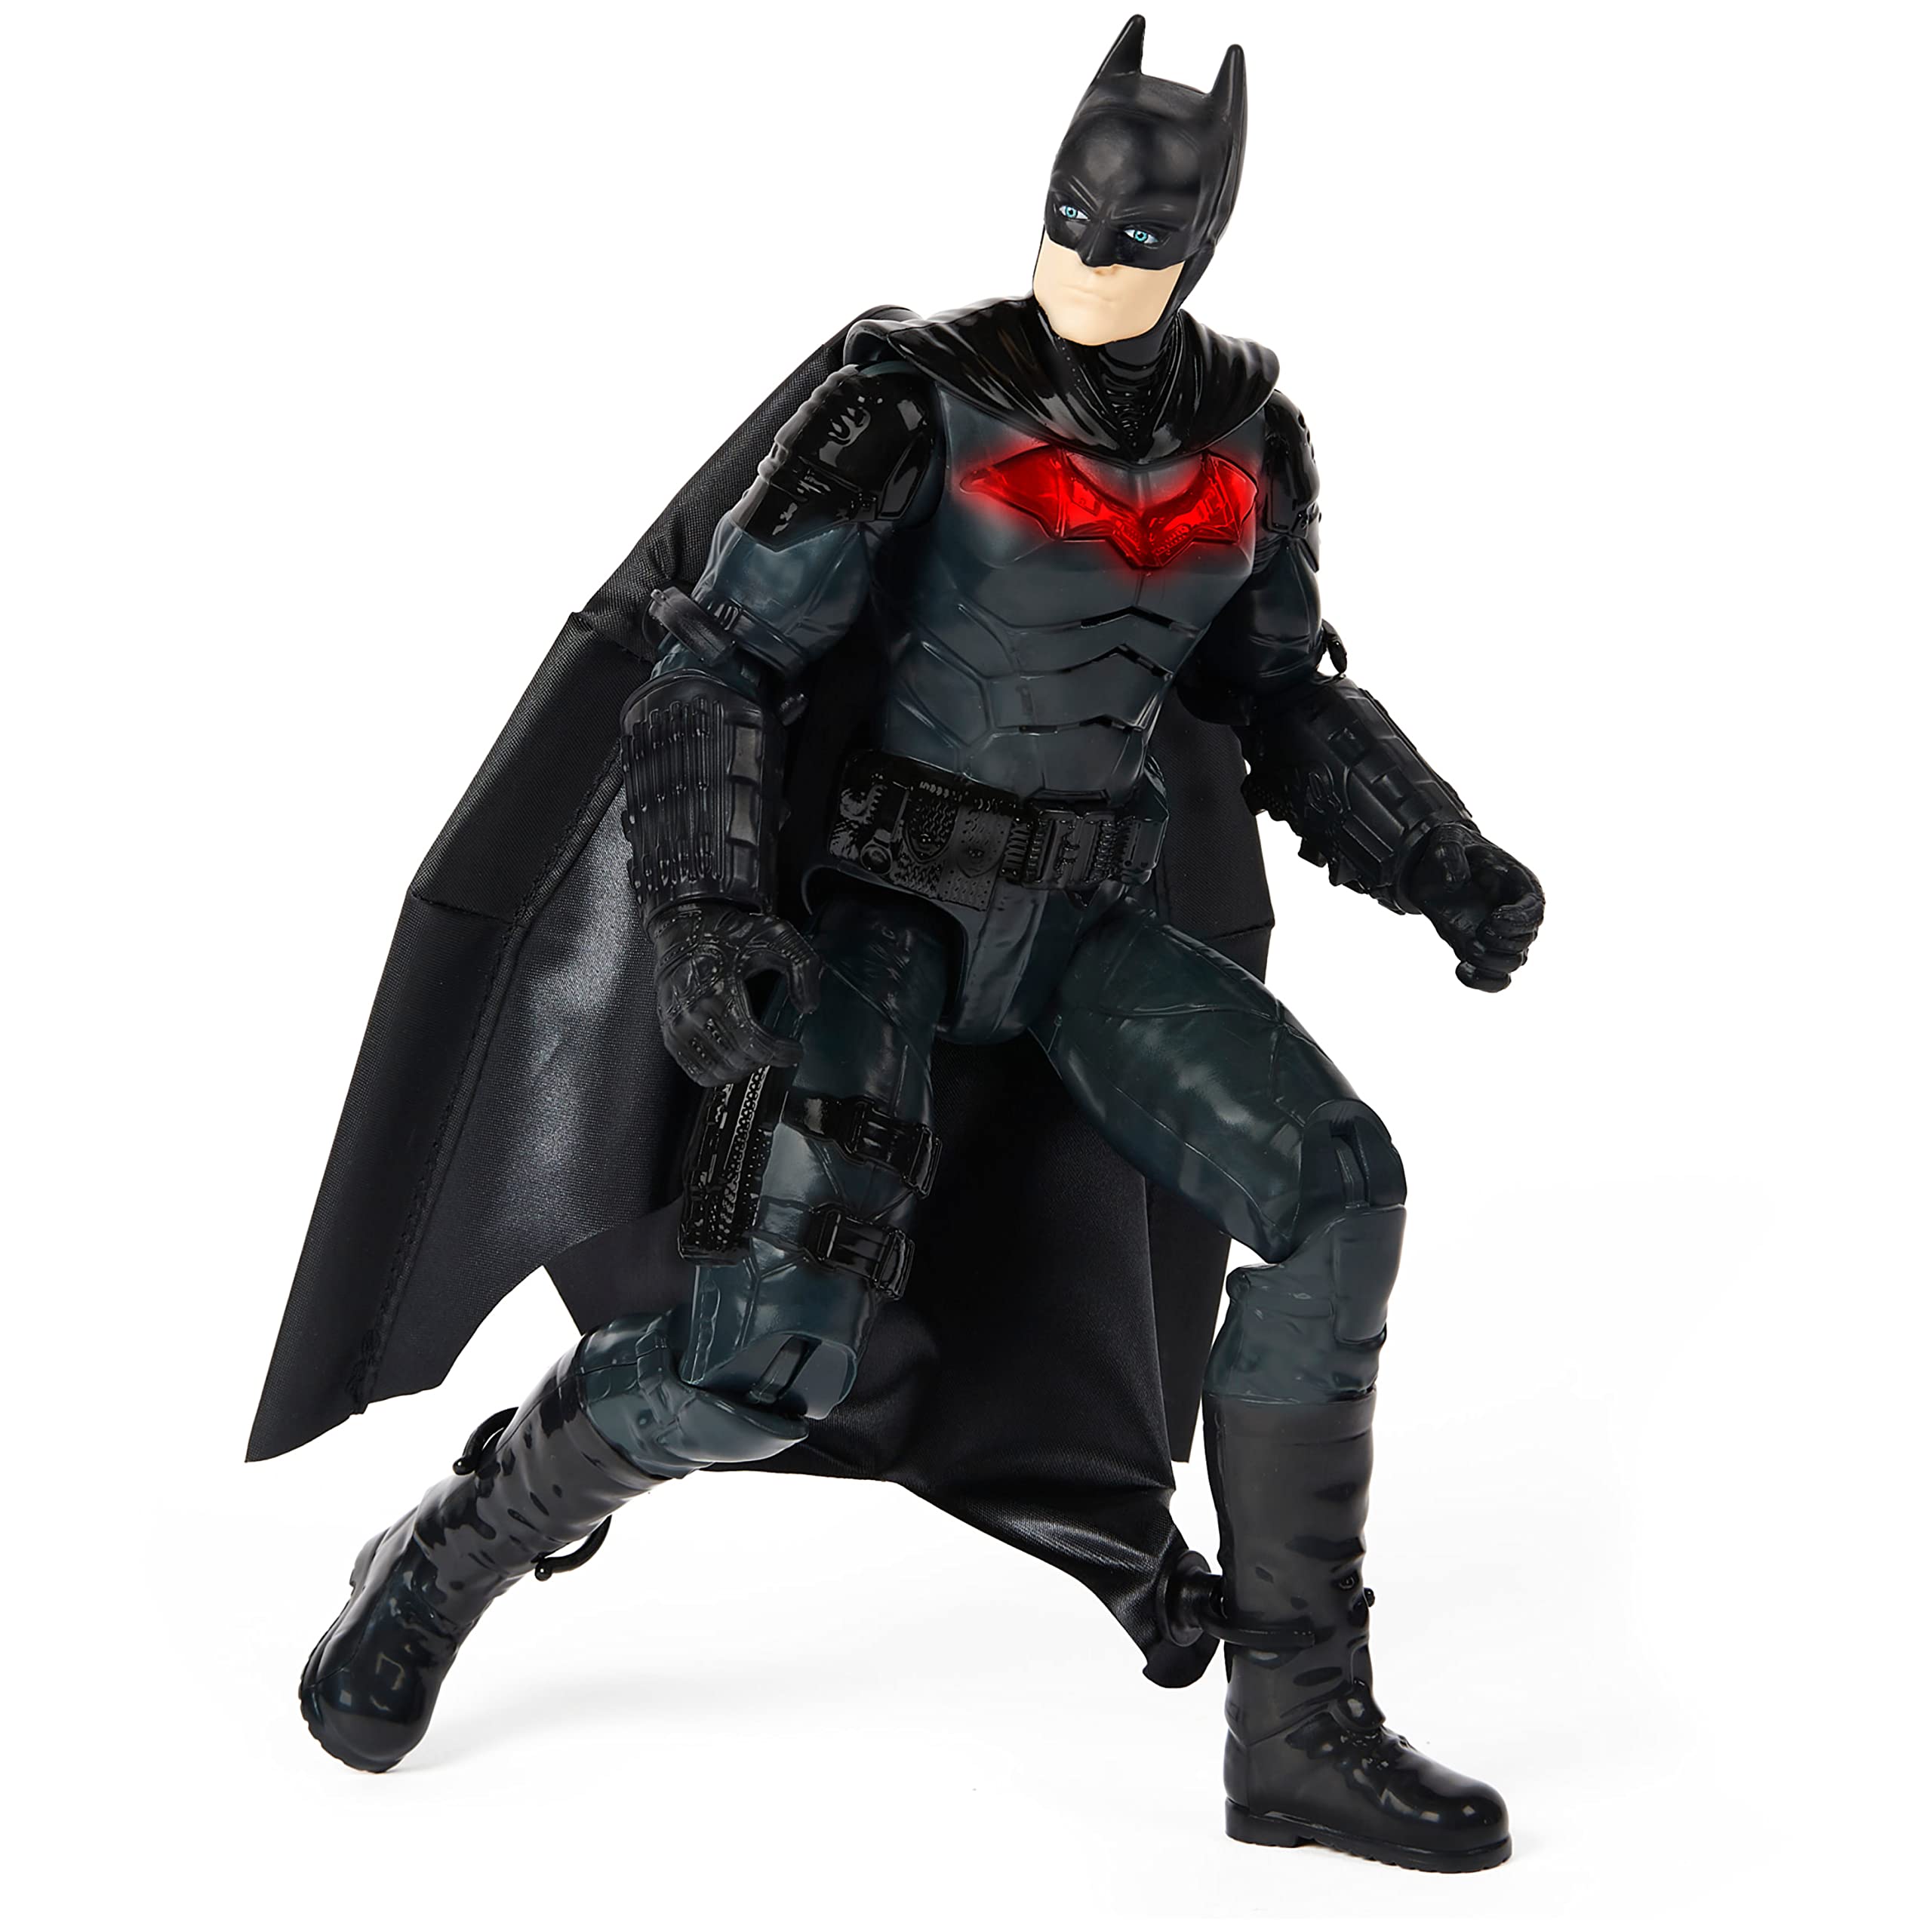 BATMAN DC Comics, 30cm Wingsuit Action Figure with Lights and Phrases, Expanding Wings, The Movie Collectible Kids Toys for Boys and Girls Ages 3 and up